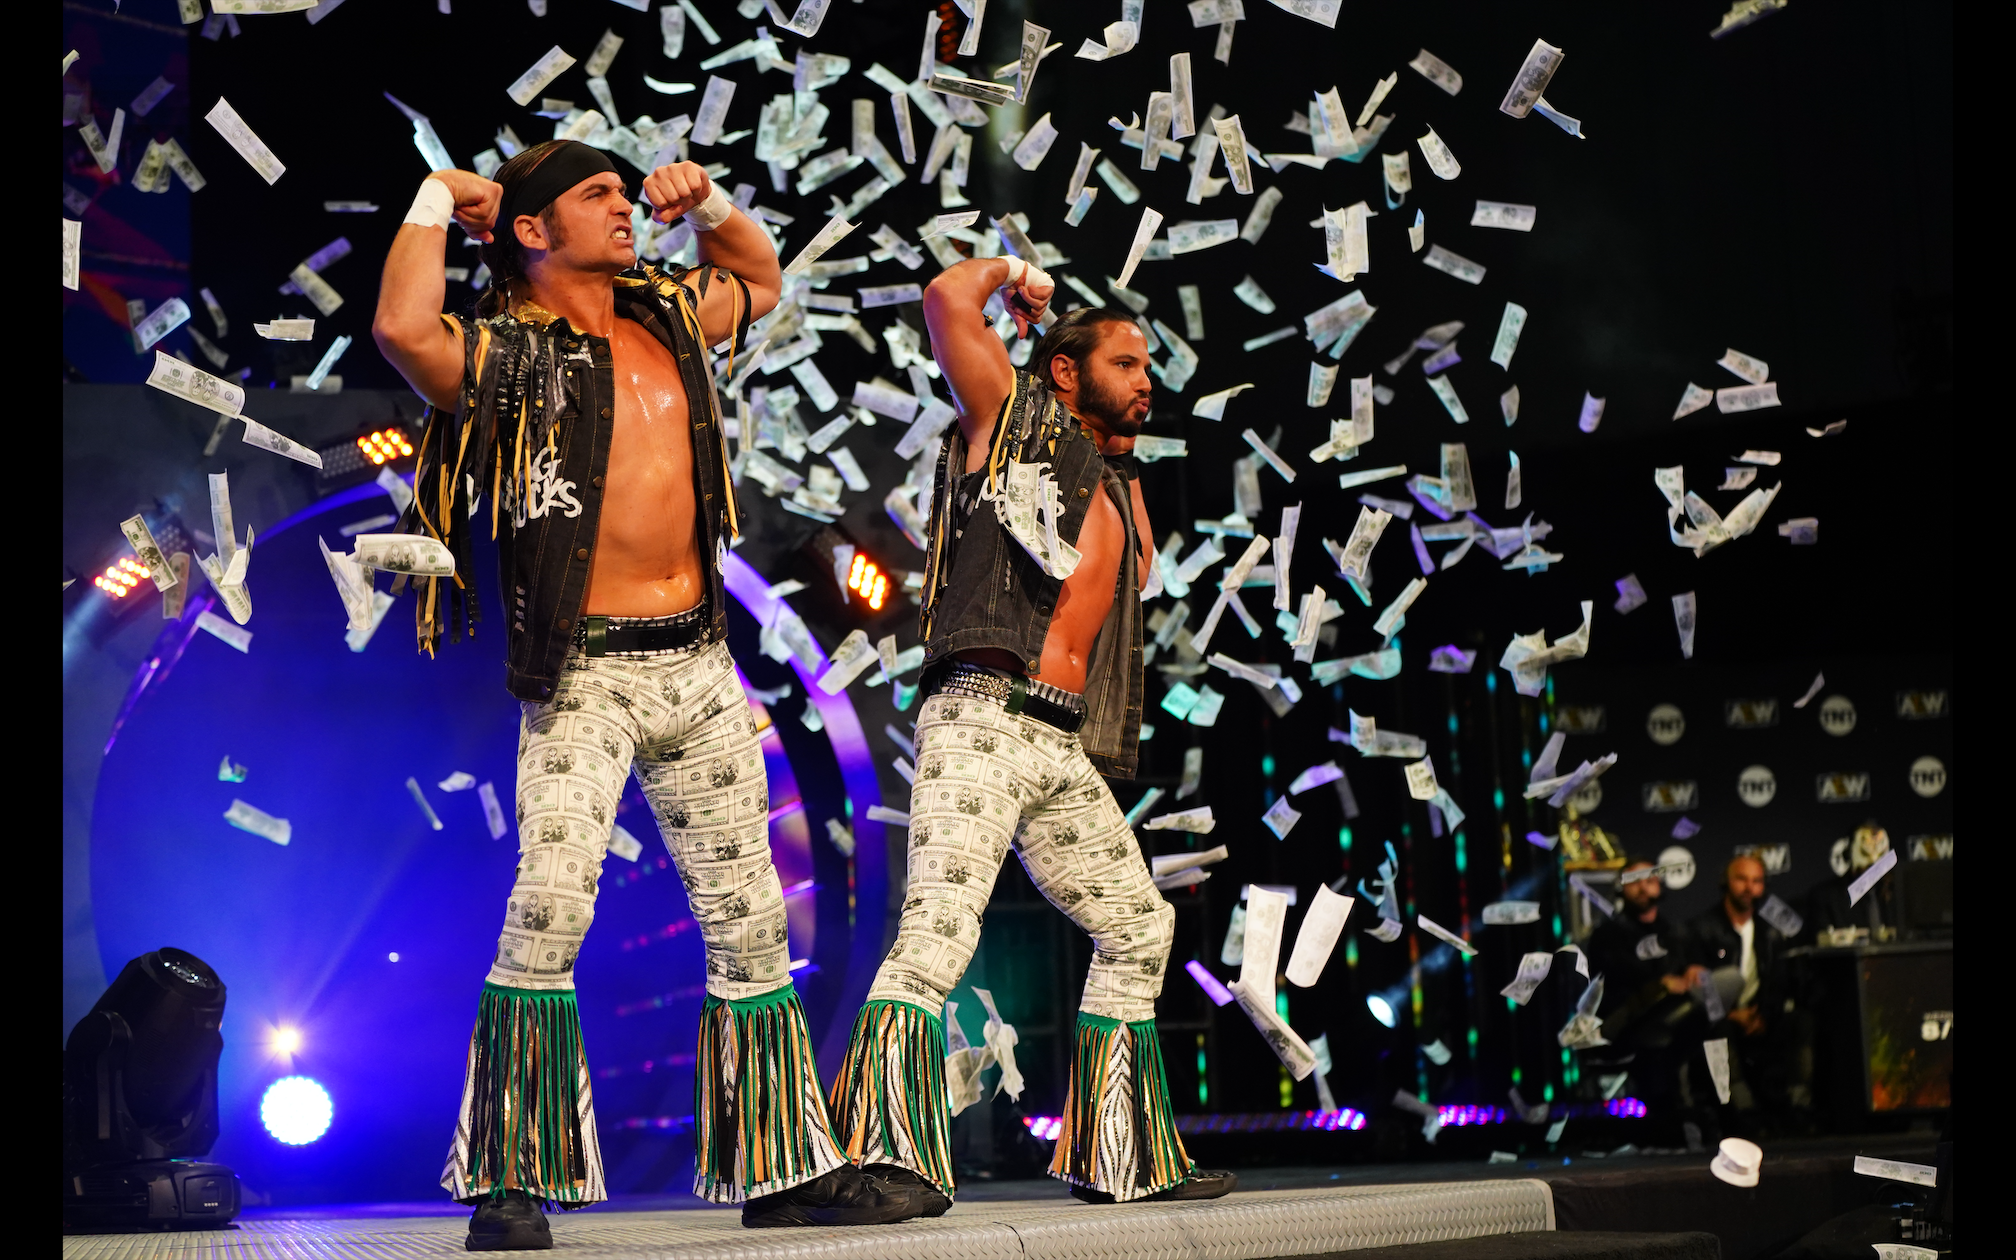 Aew S Young Bucks On Helping Young Talent After Their Rough Ride